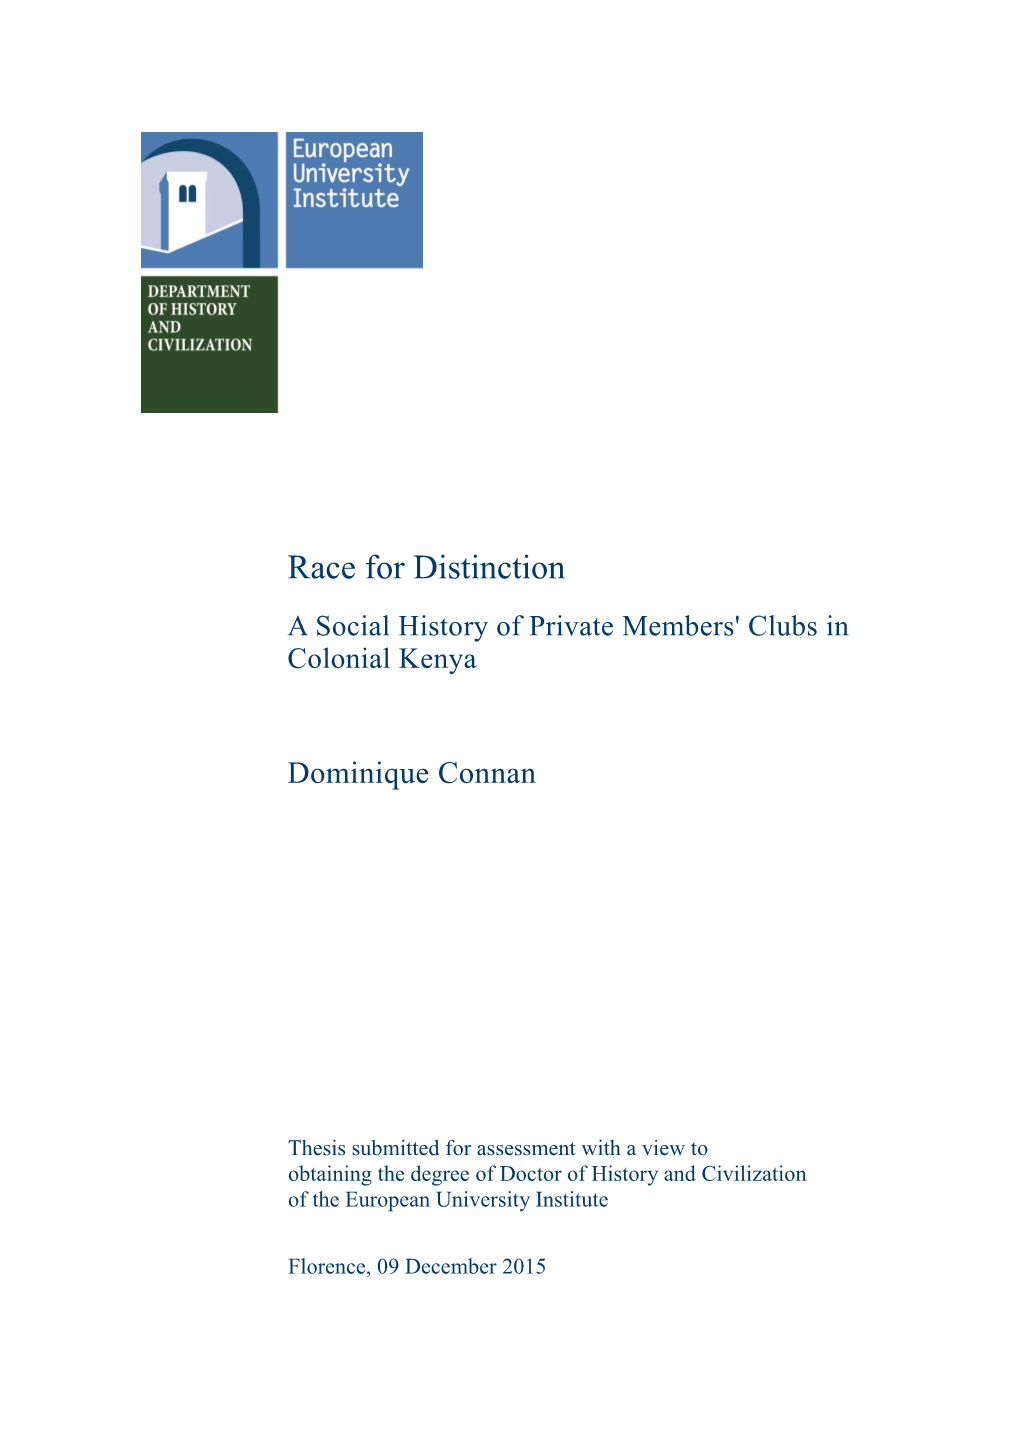 Race for Distinction a Social History of Private Members' Clubs in Colonial Kenya